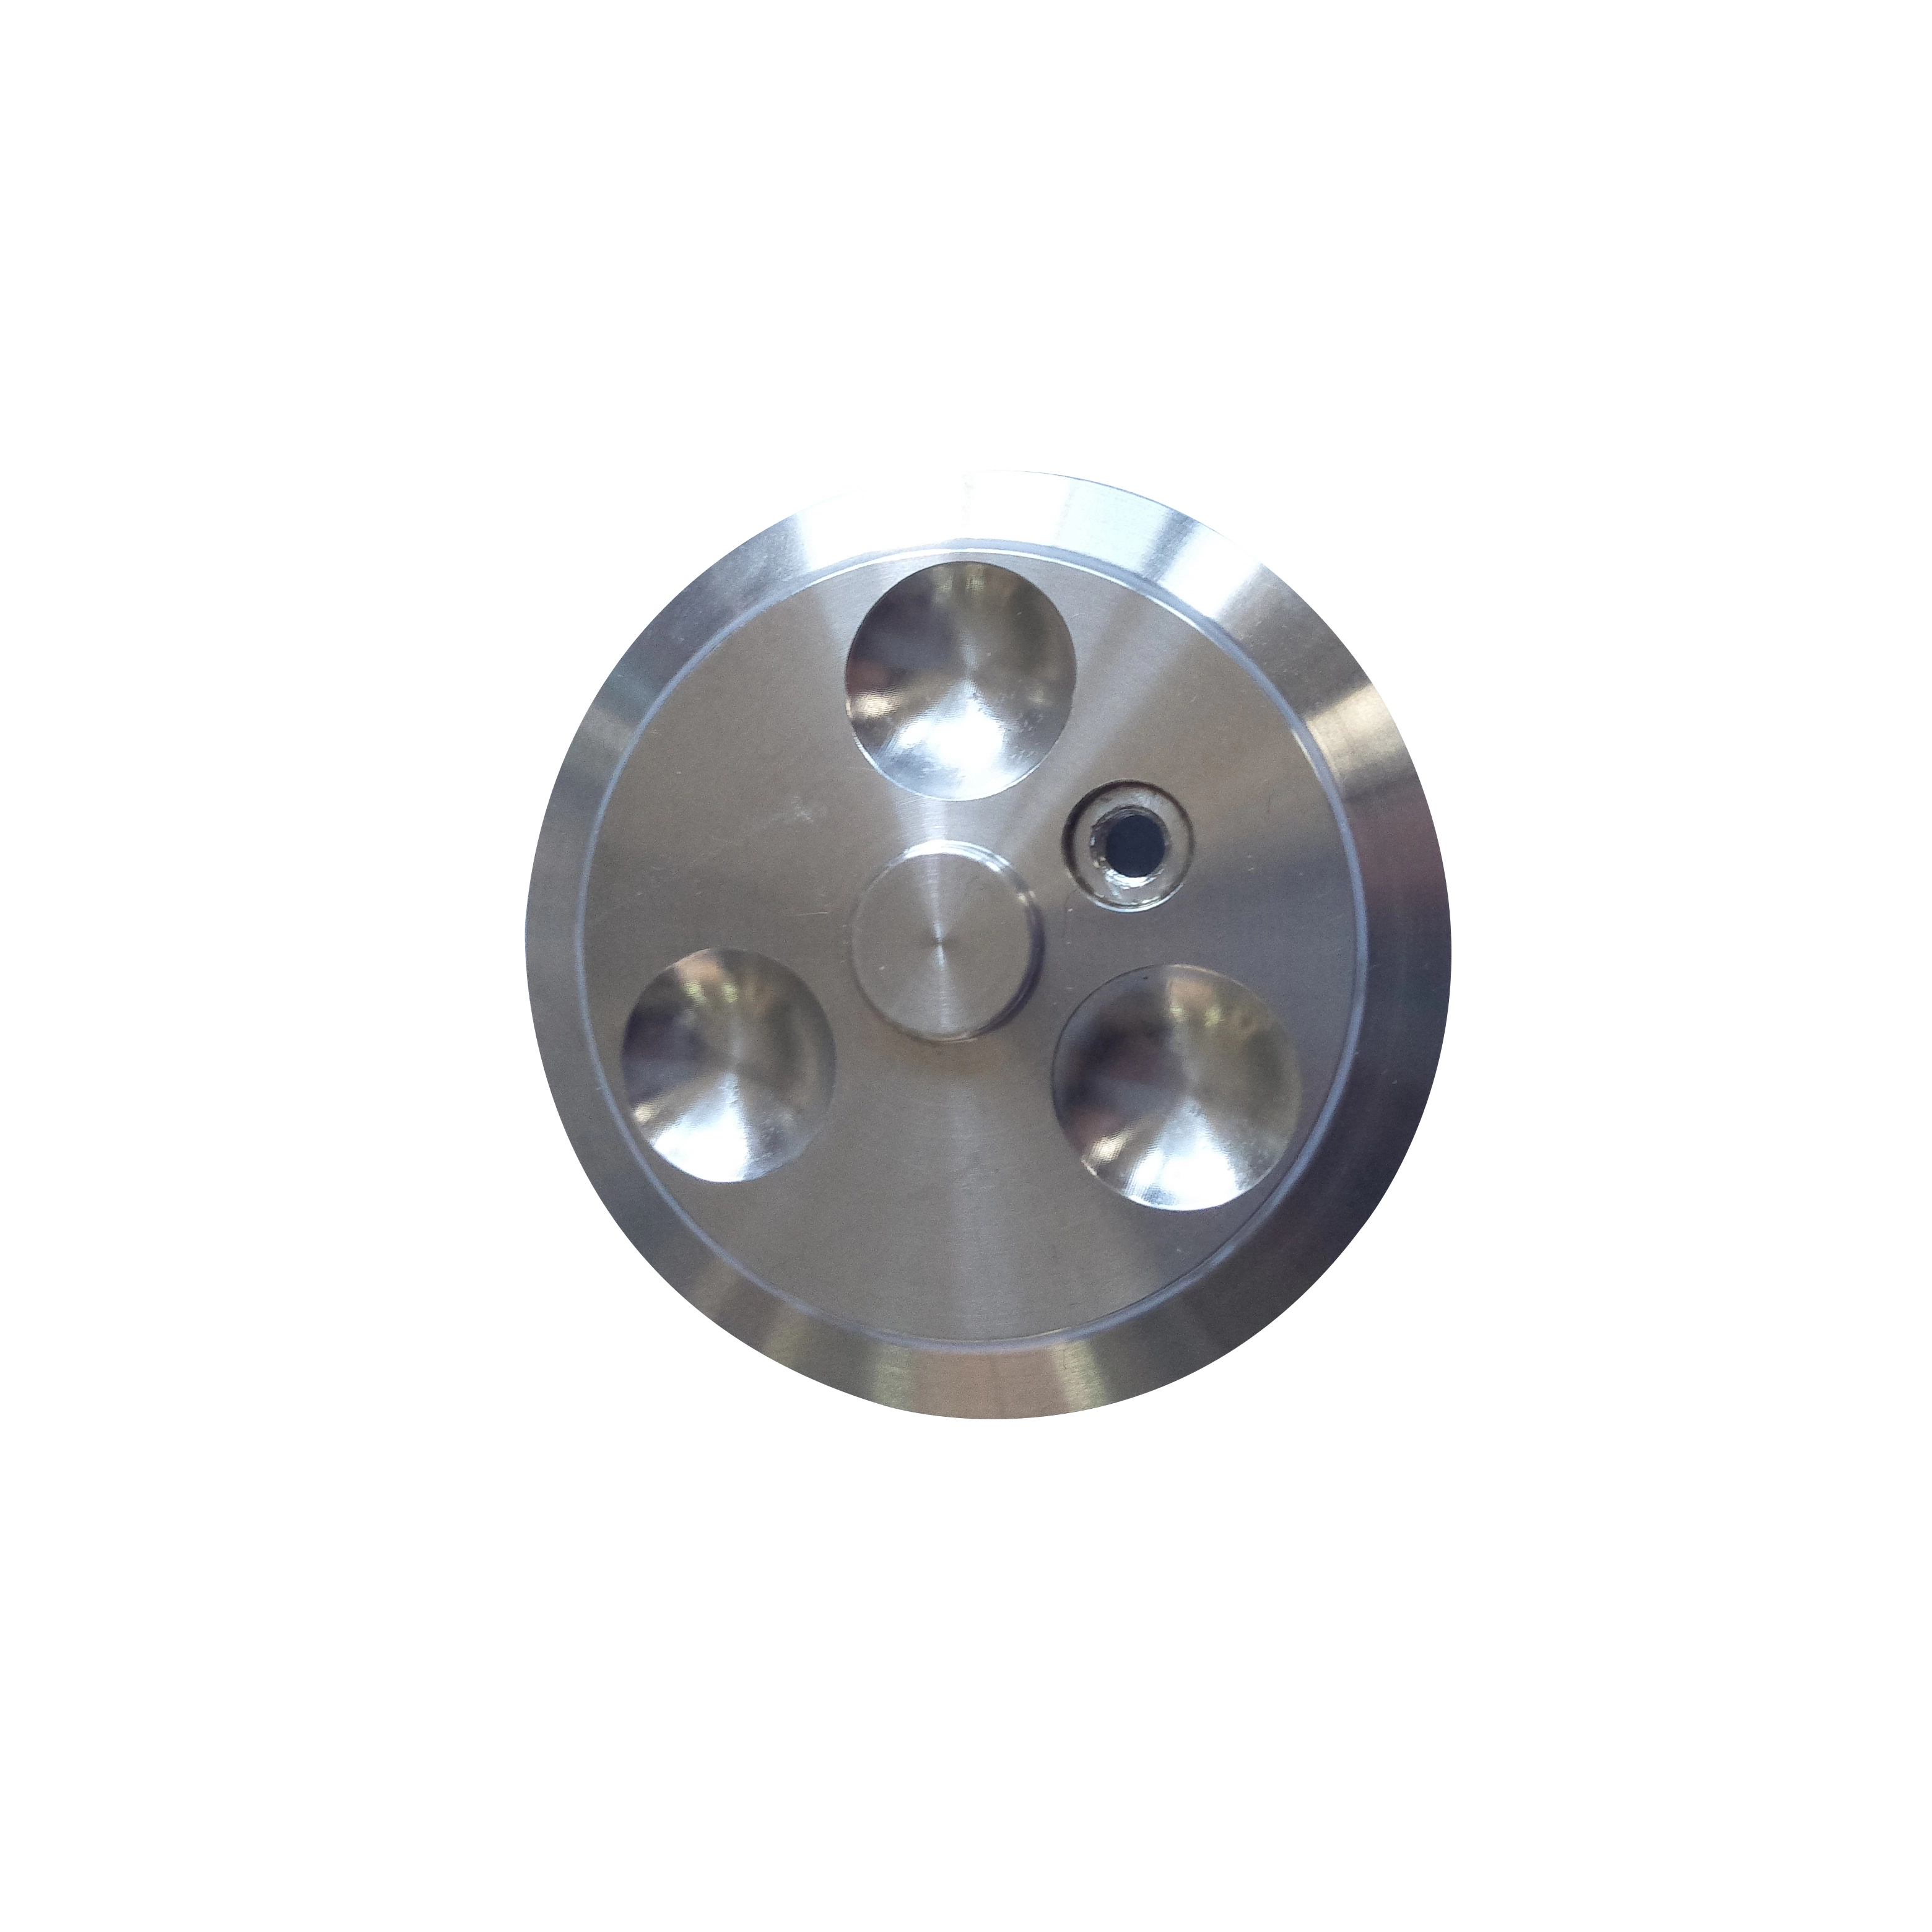 Large Dimension Steel Parts Processed by Cnc 6 Axis High Precision Automatic Turning-Milling Machine